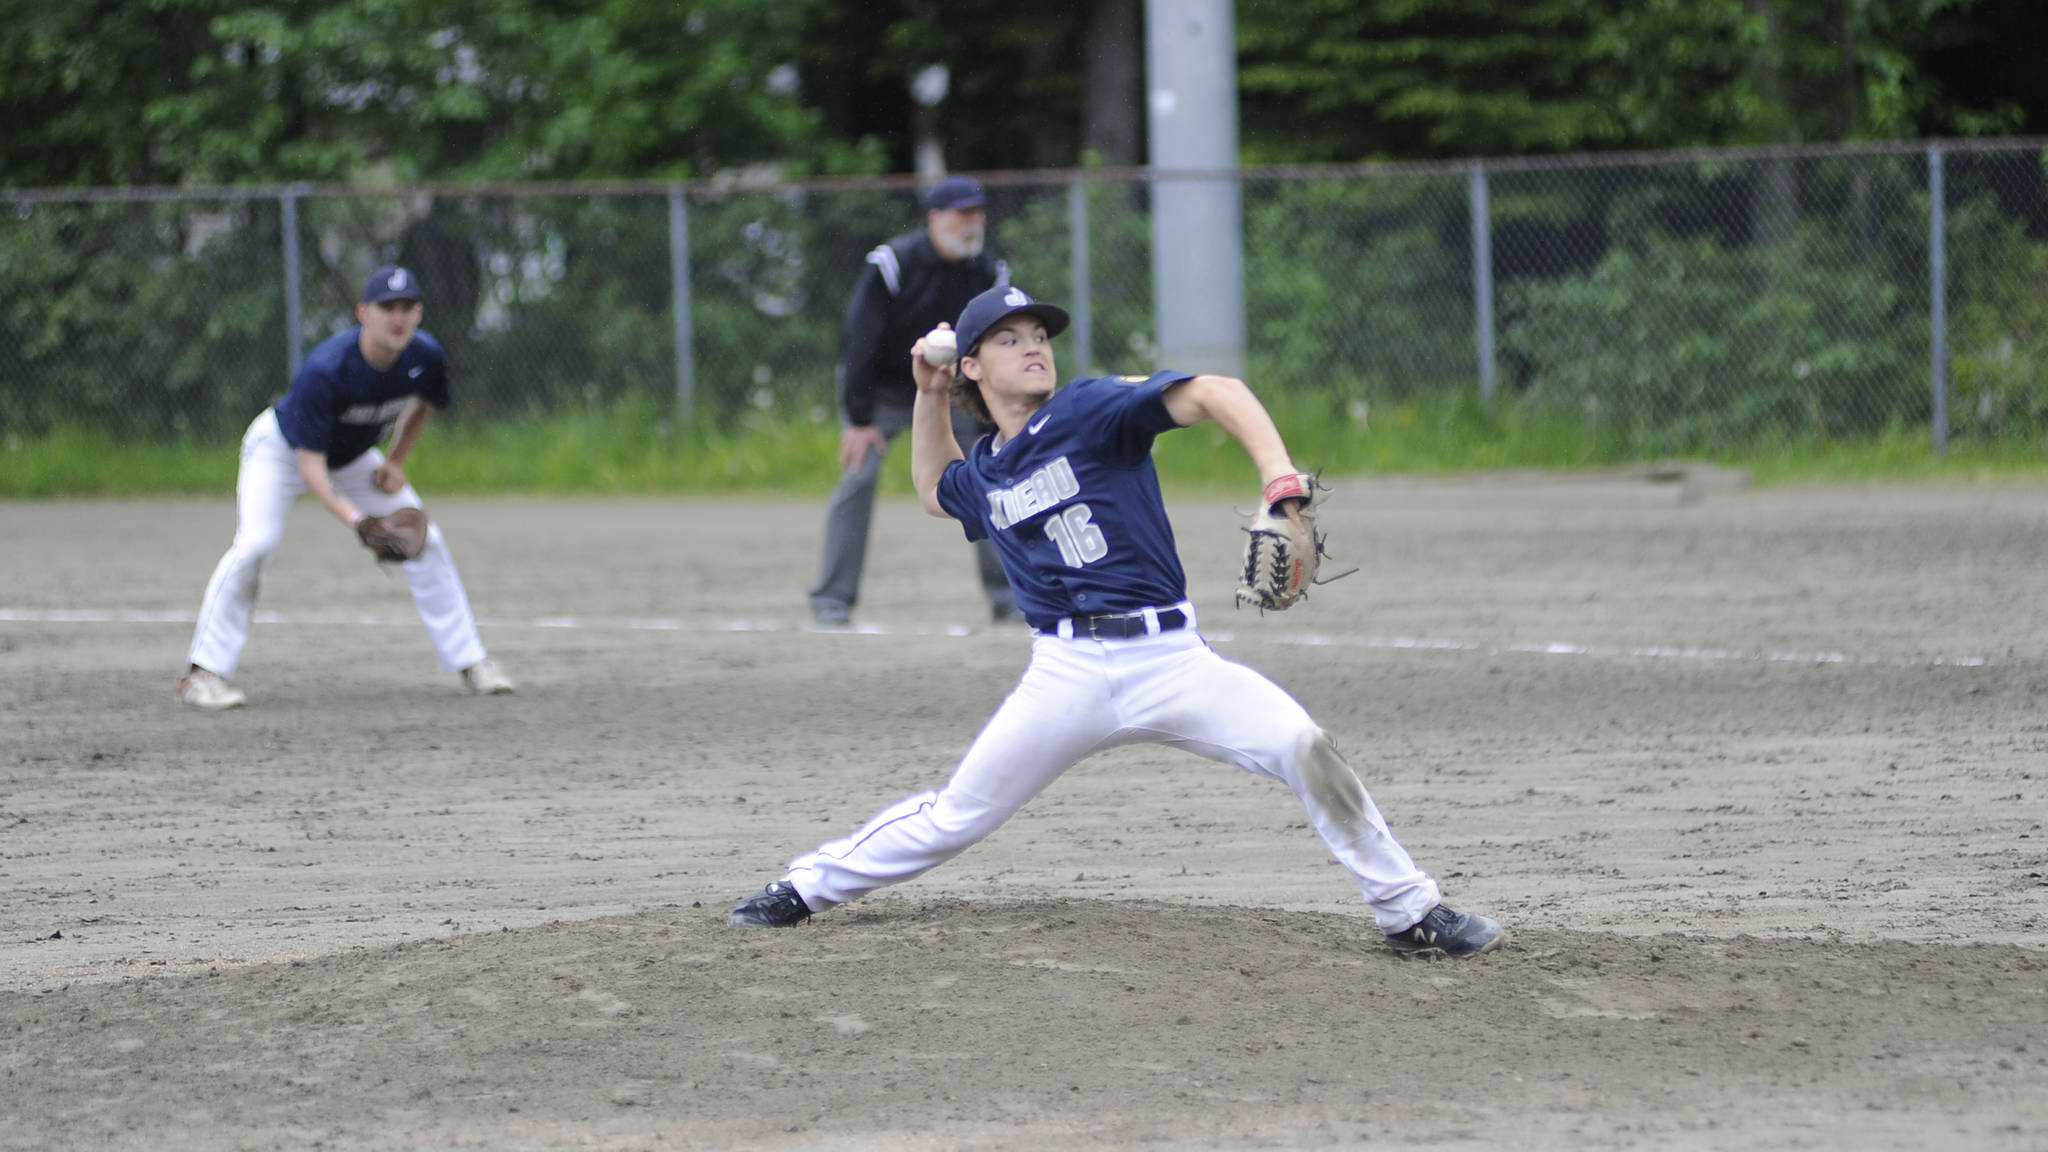 Juneau Post 25’s Donavin McCurley pitches against East Post 34 earlier this month. (Nolin Ainsworth | Juneau Empire File)